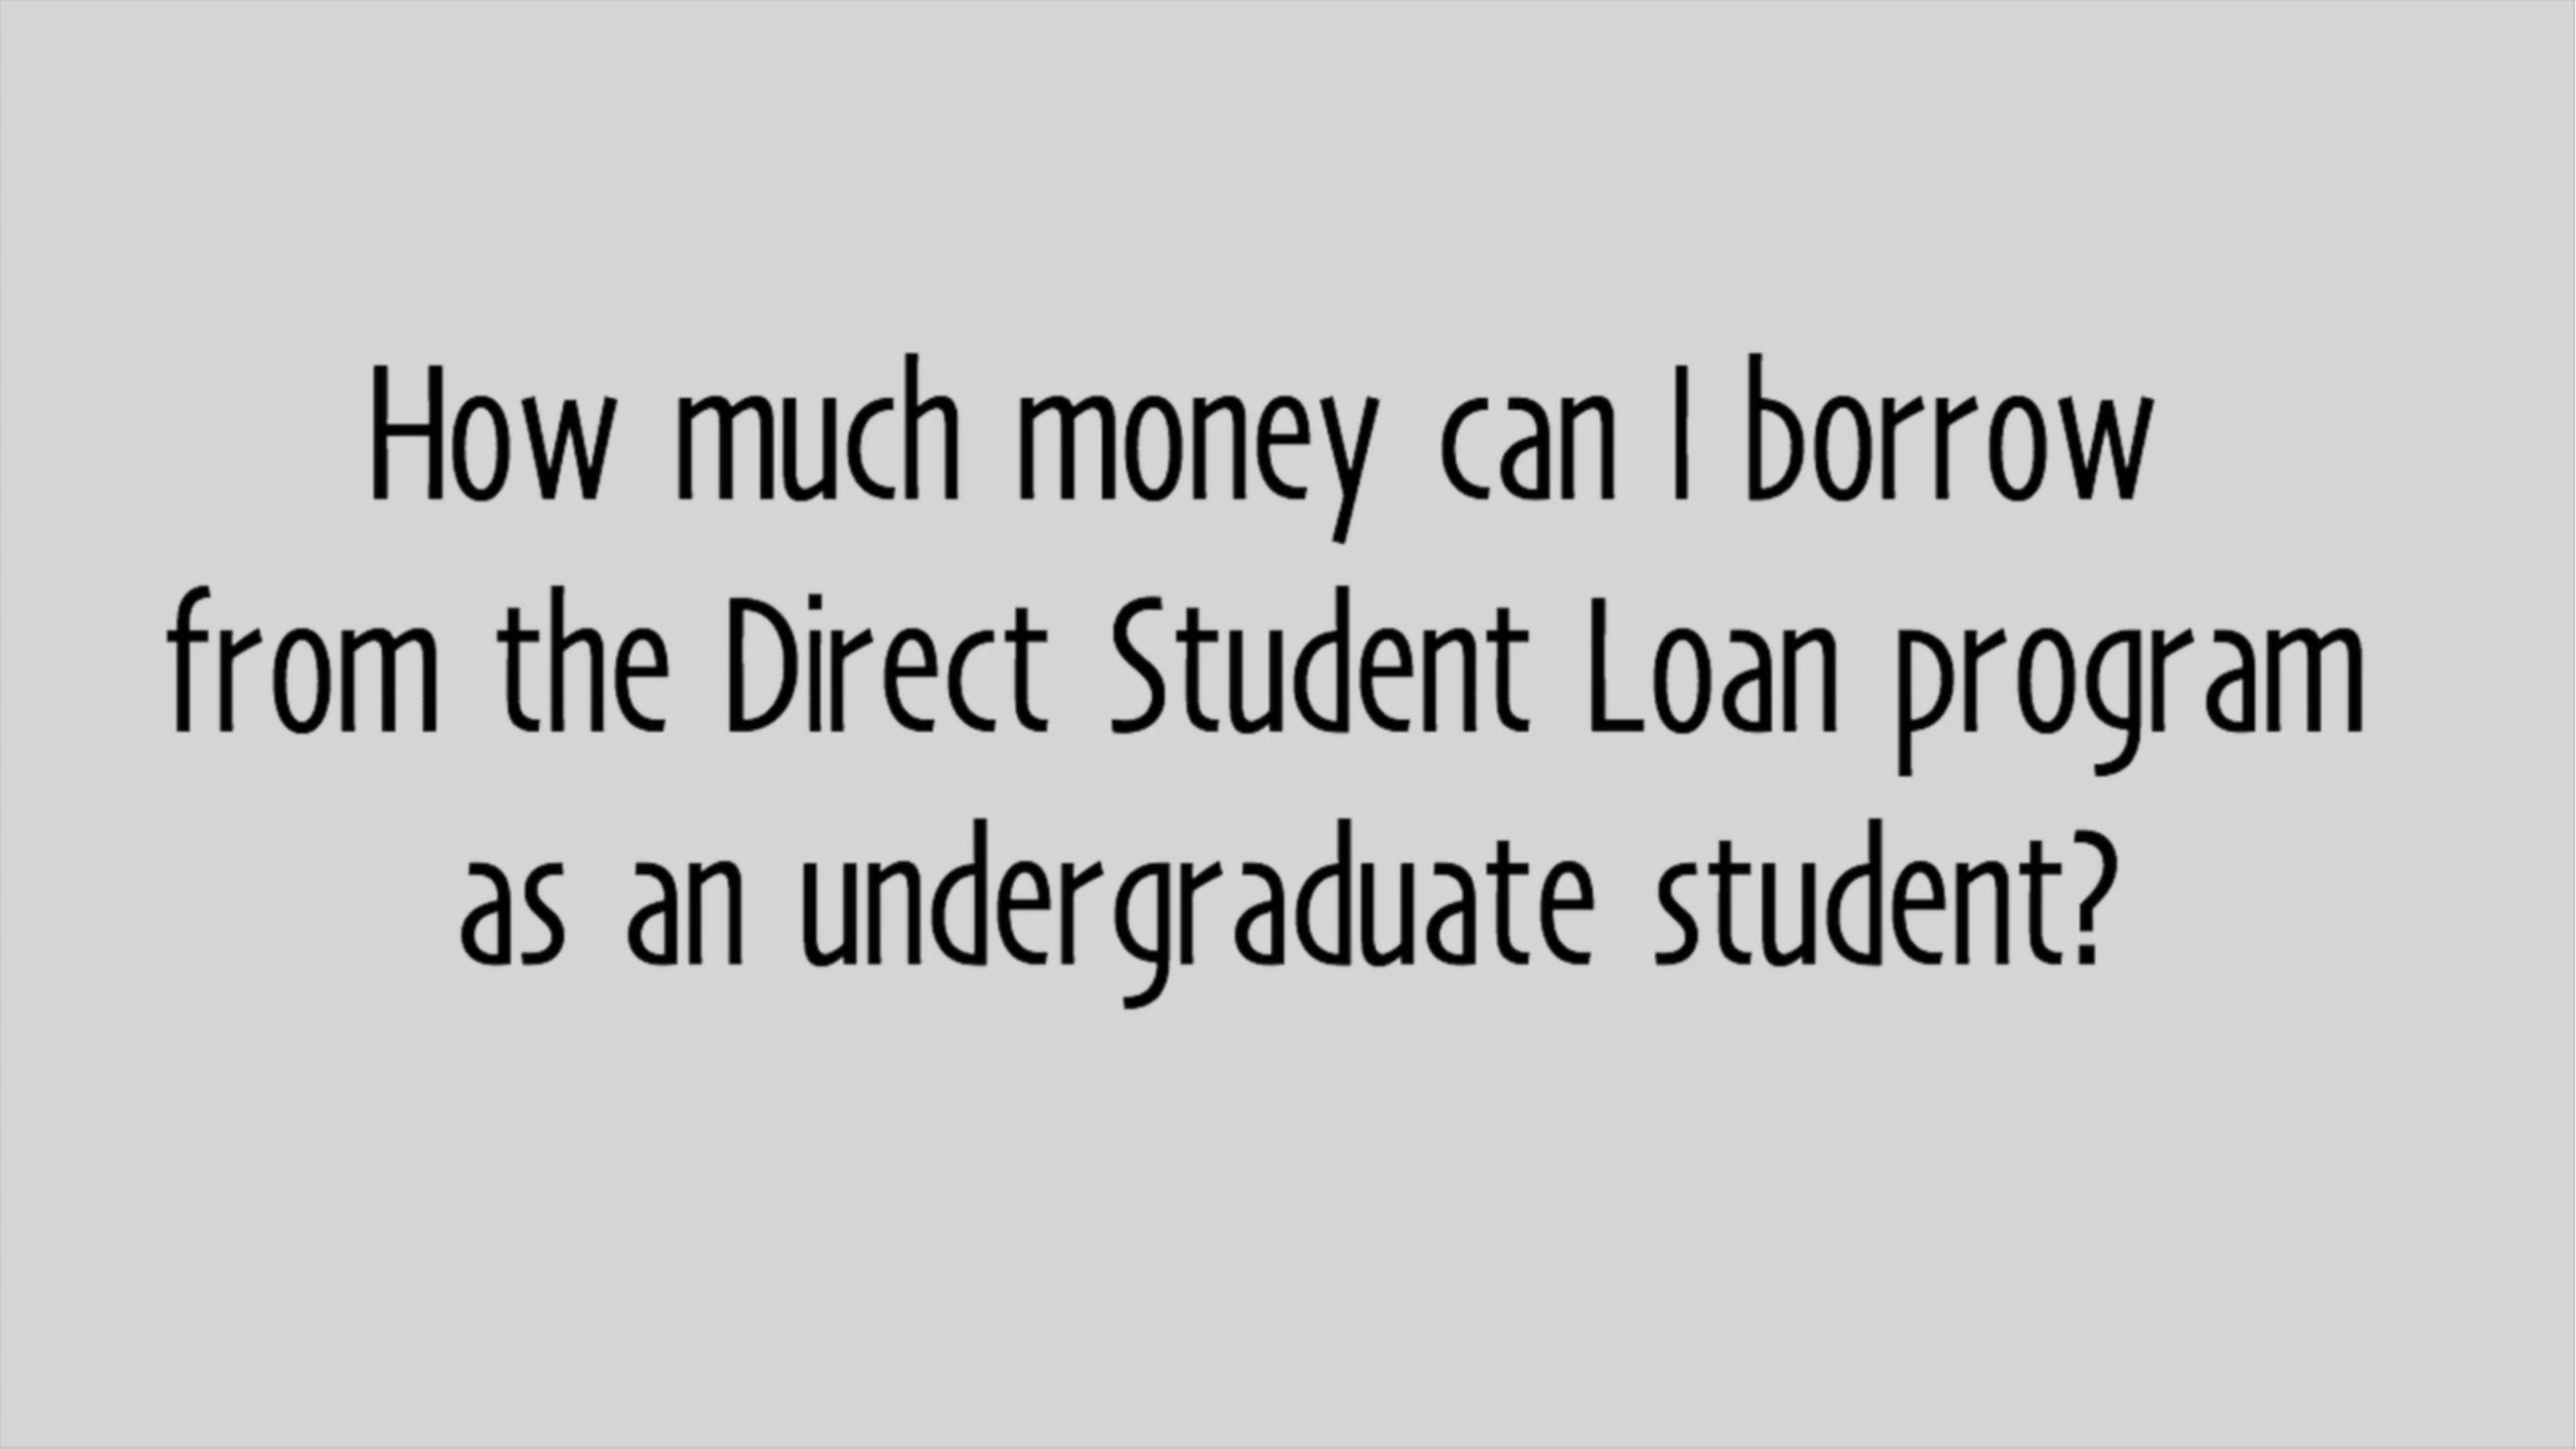 Play 'How much can I borrow from the Direct Student Loan program as an undergraduate student?'